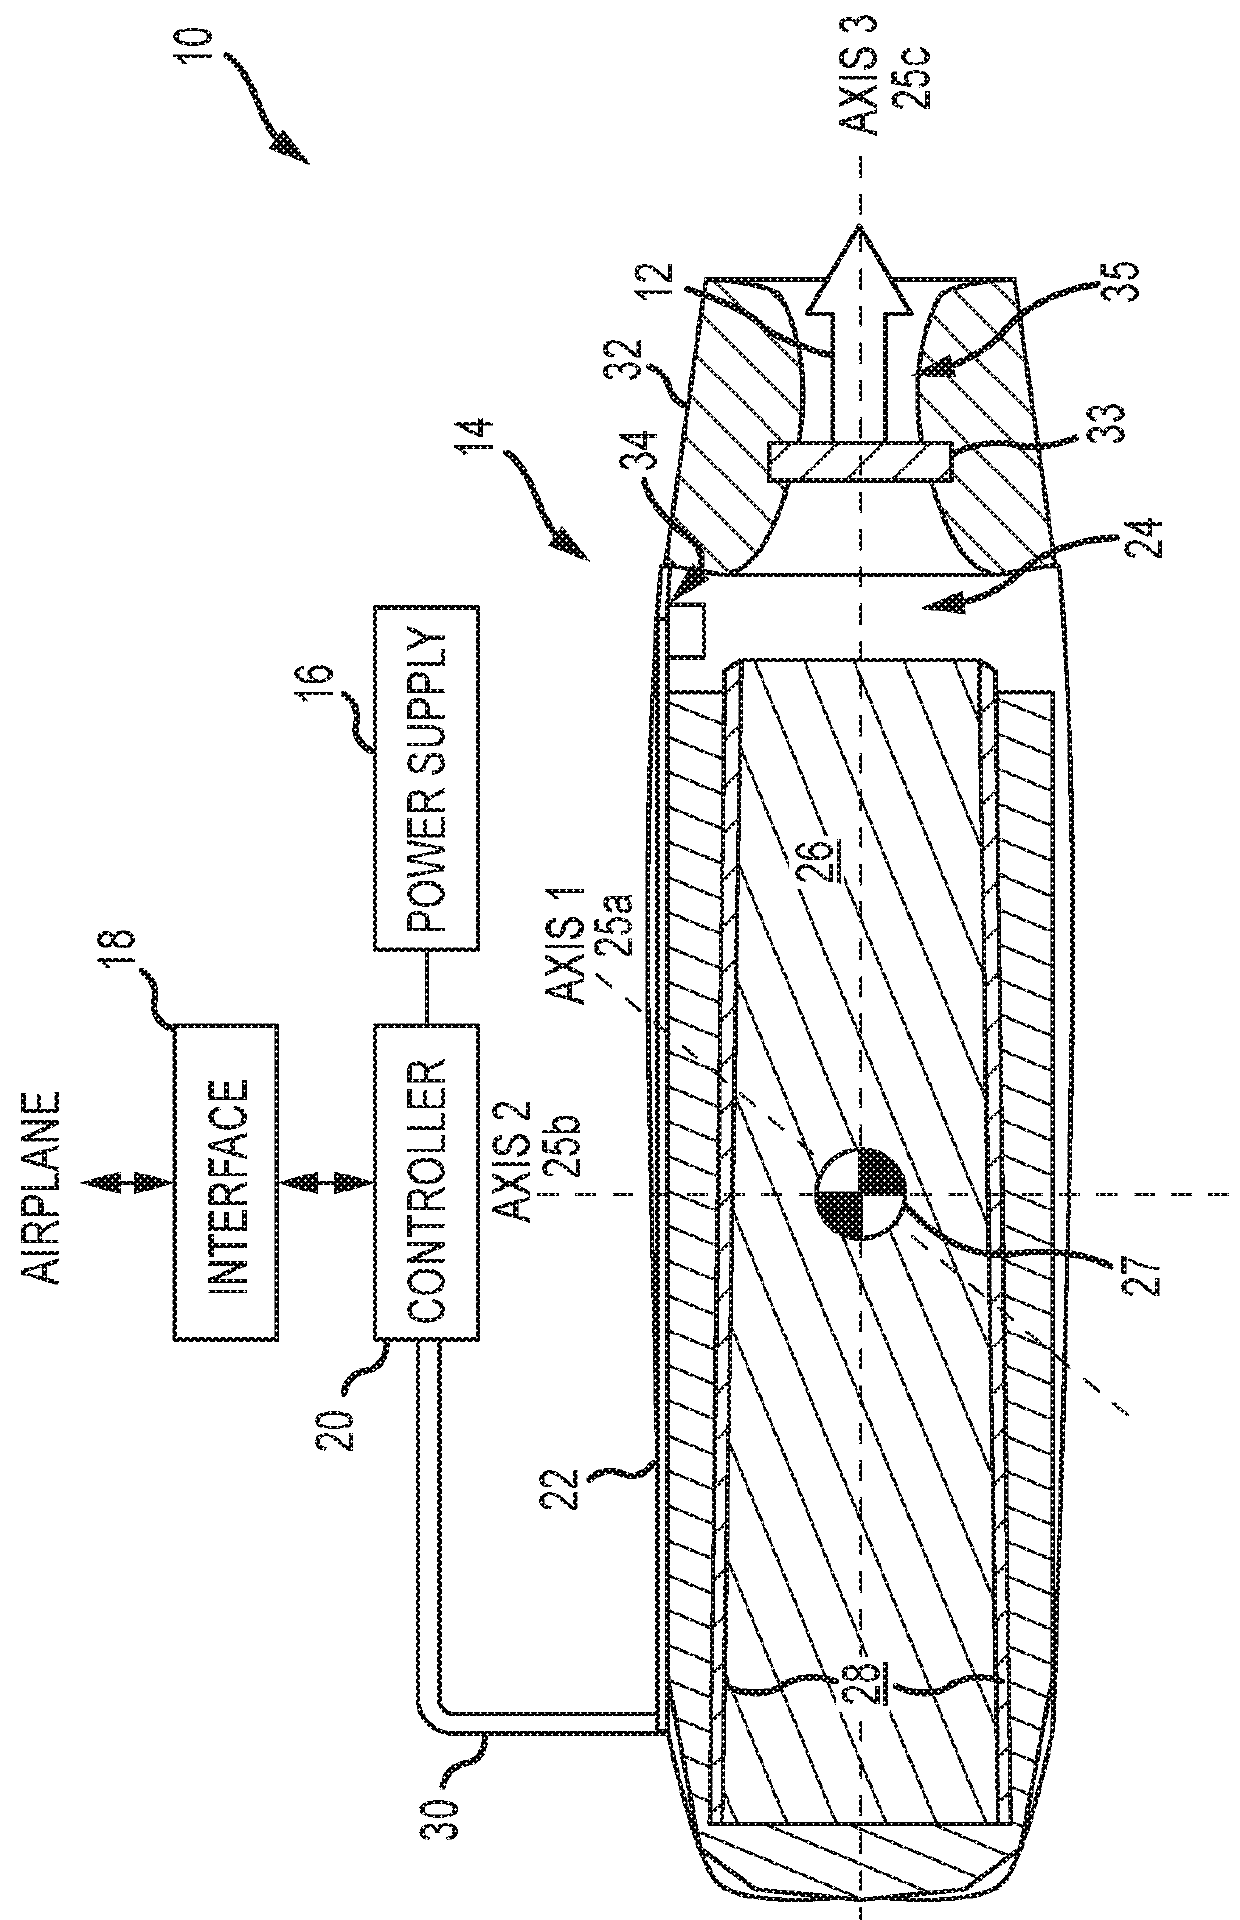 Electrically operated propellant thrust assist for supplementing airplane takeoff, landing or in-flight maneuverability